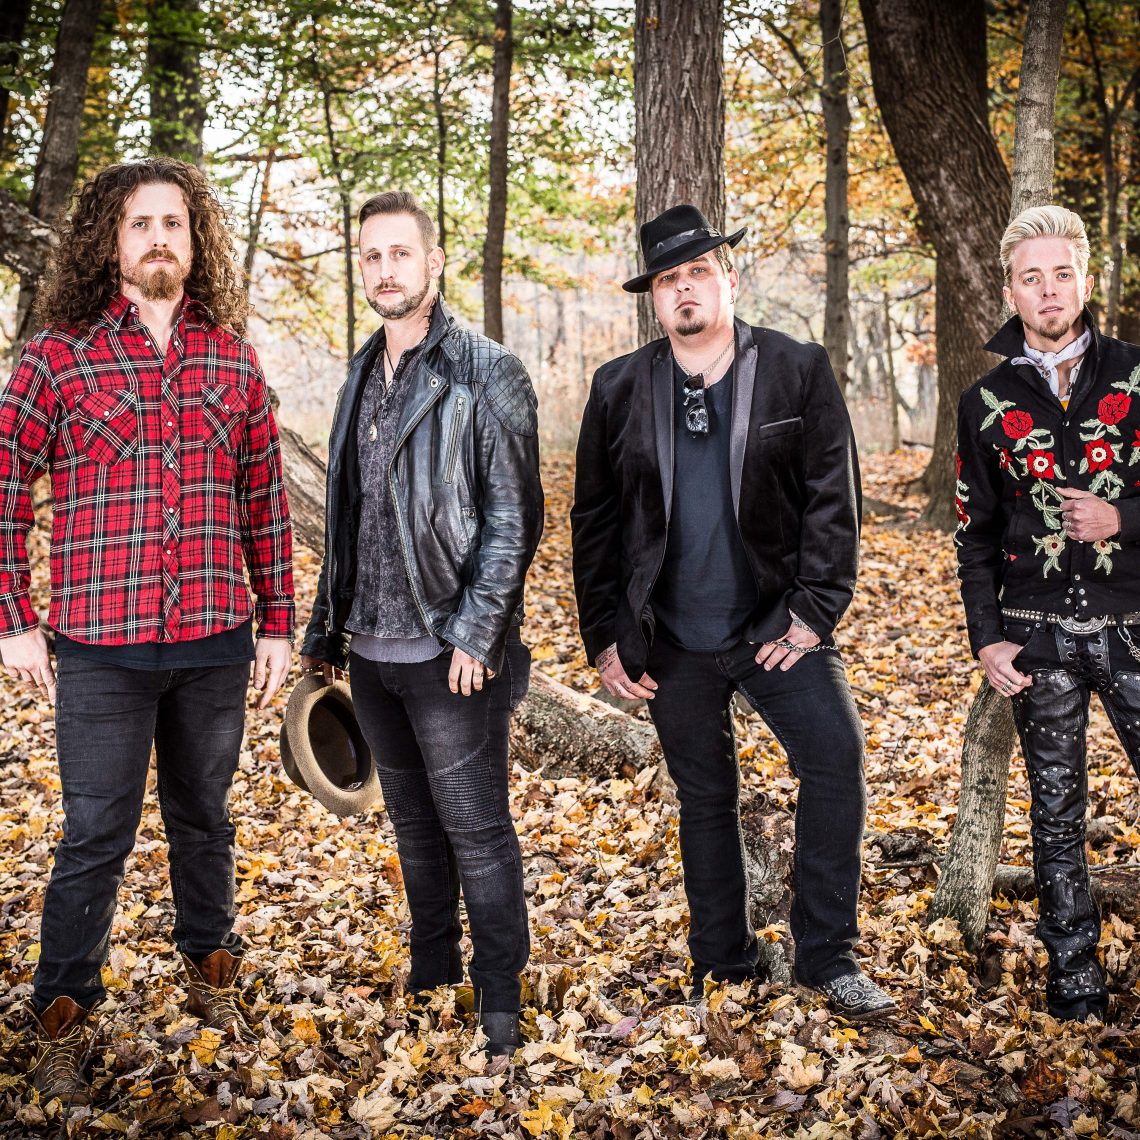 BLACK STONE CHERRY time travel in their ‘Bad Habit’ video